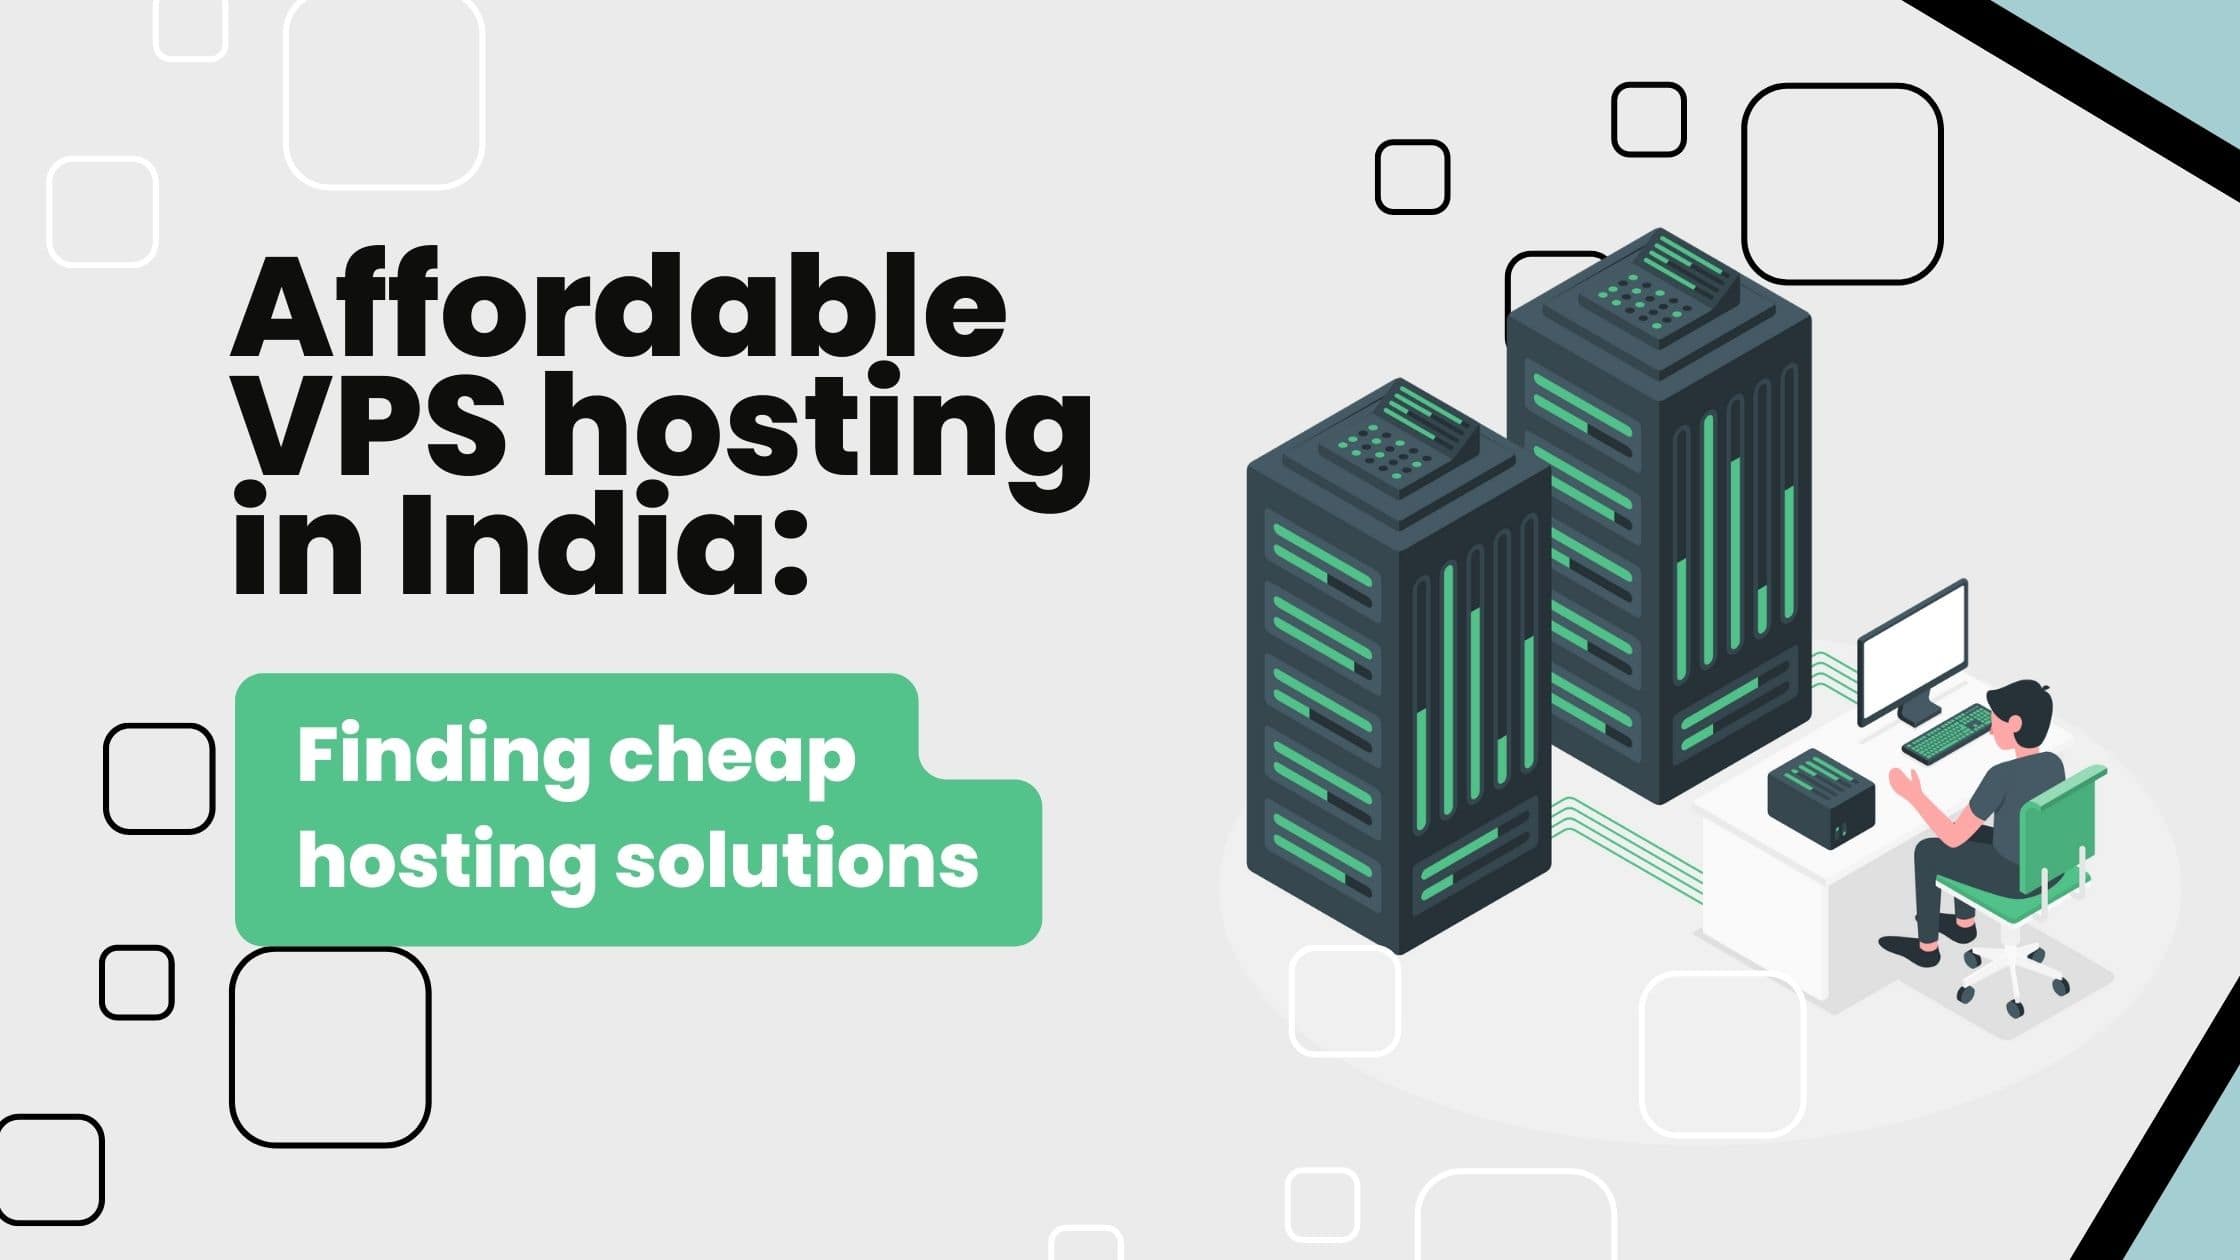 Affordable VPS hosting in India Finding cheap hosting solutions